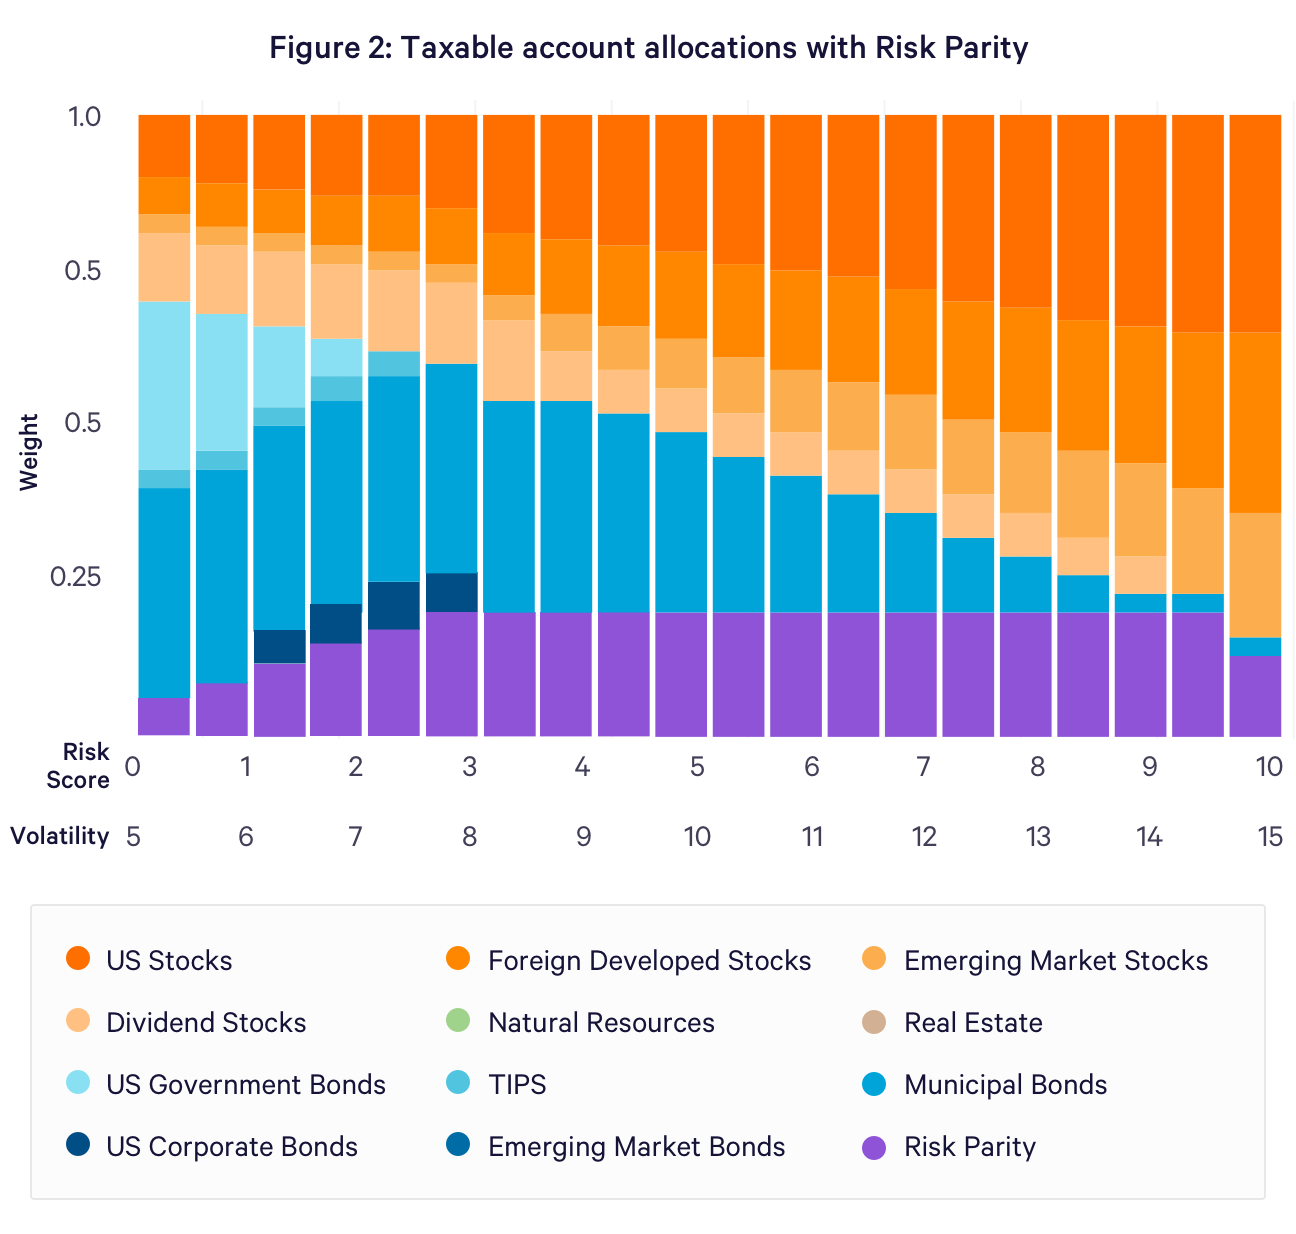 Taxable account allocations with Risk Parity